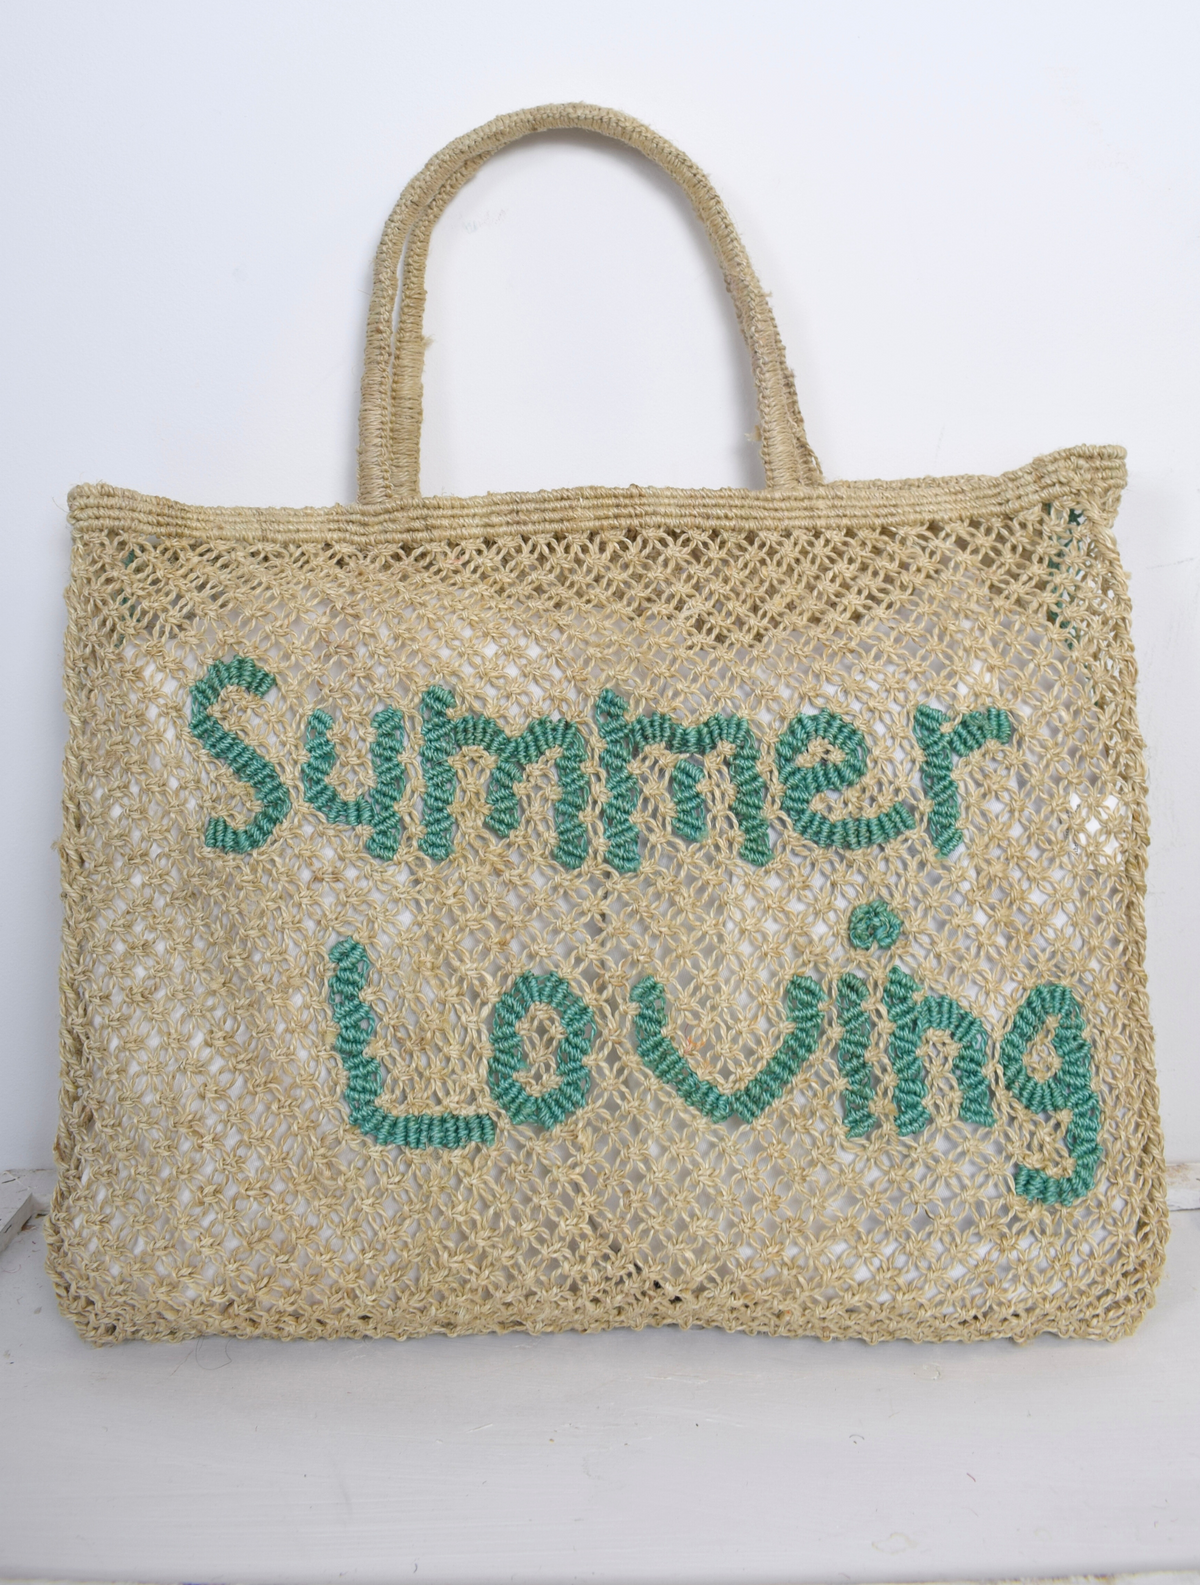 Neautral woven bag with blue writing saying 'summer loving' on 